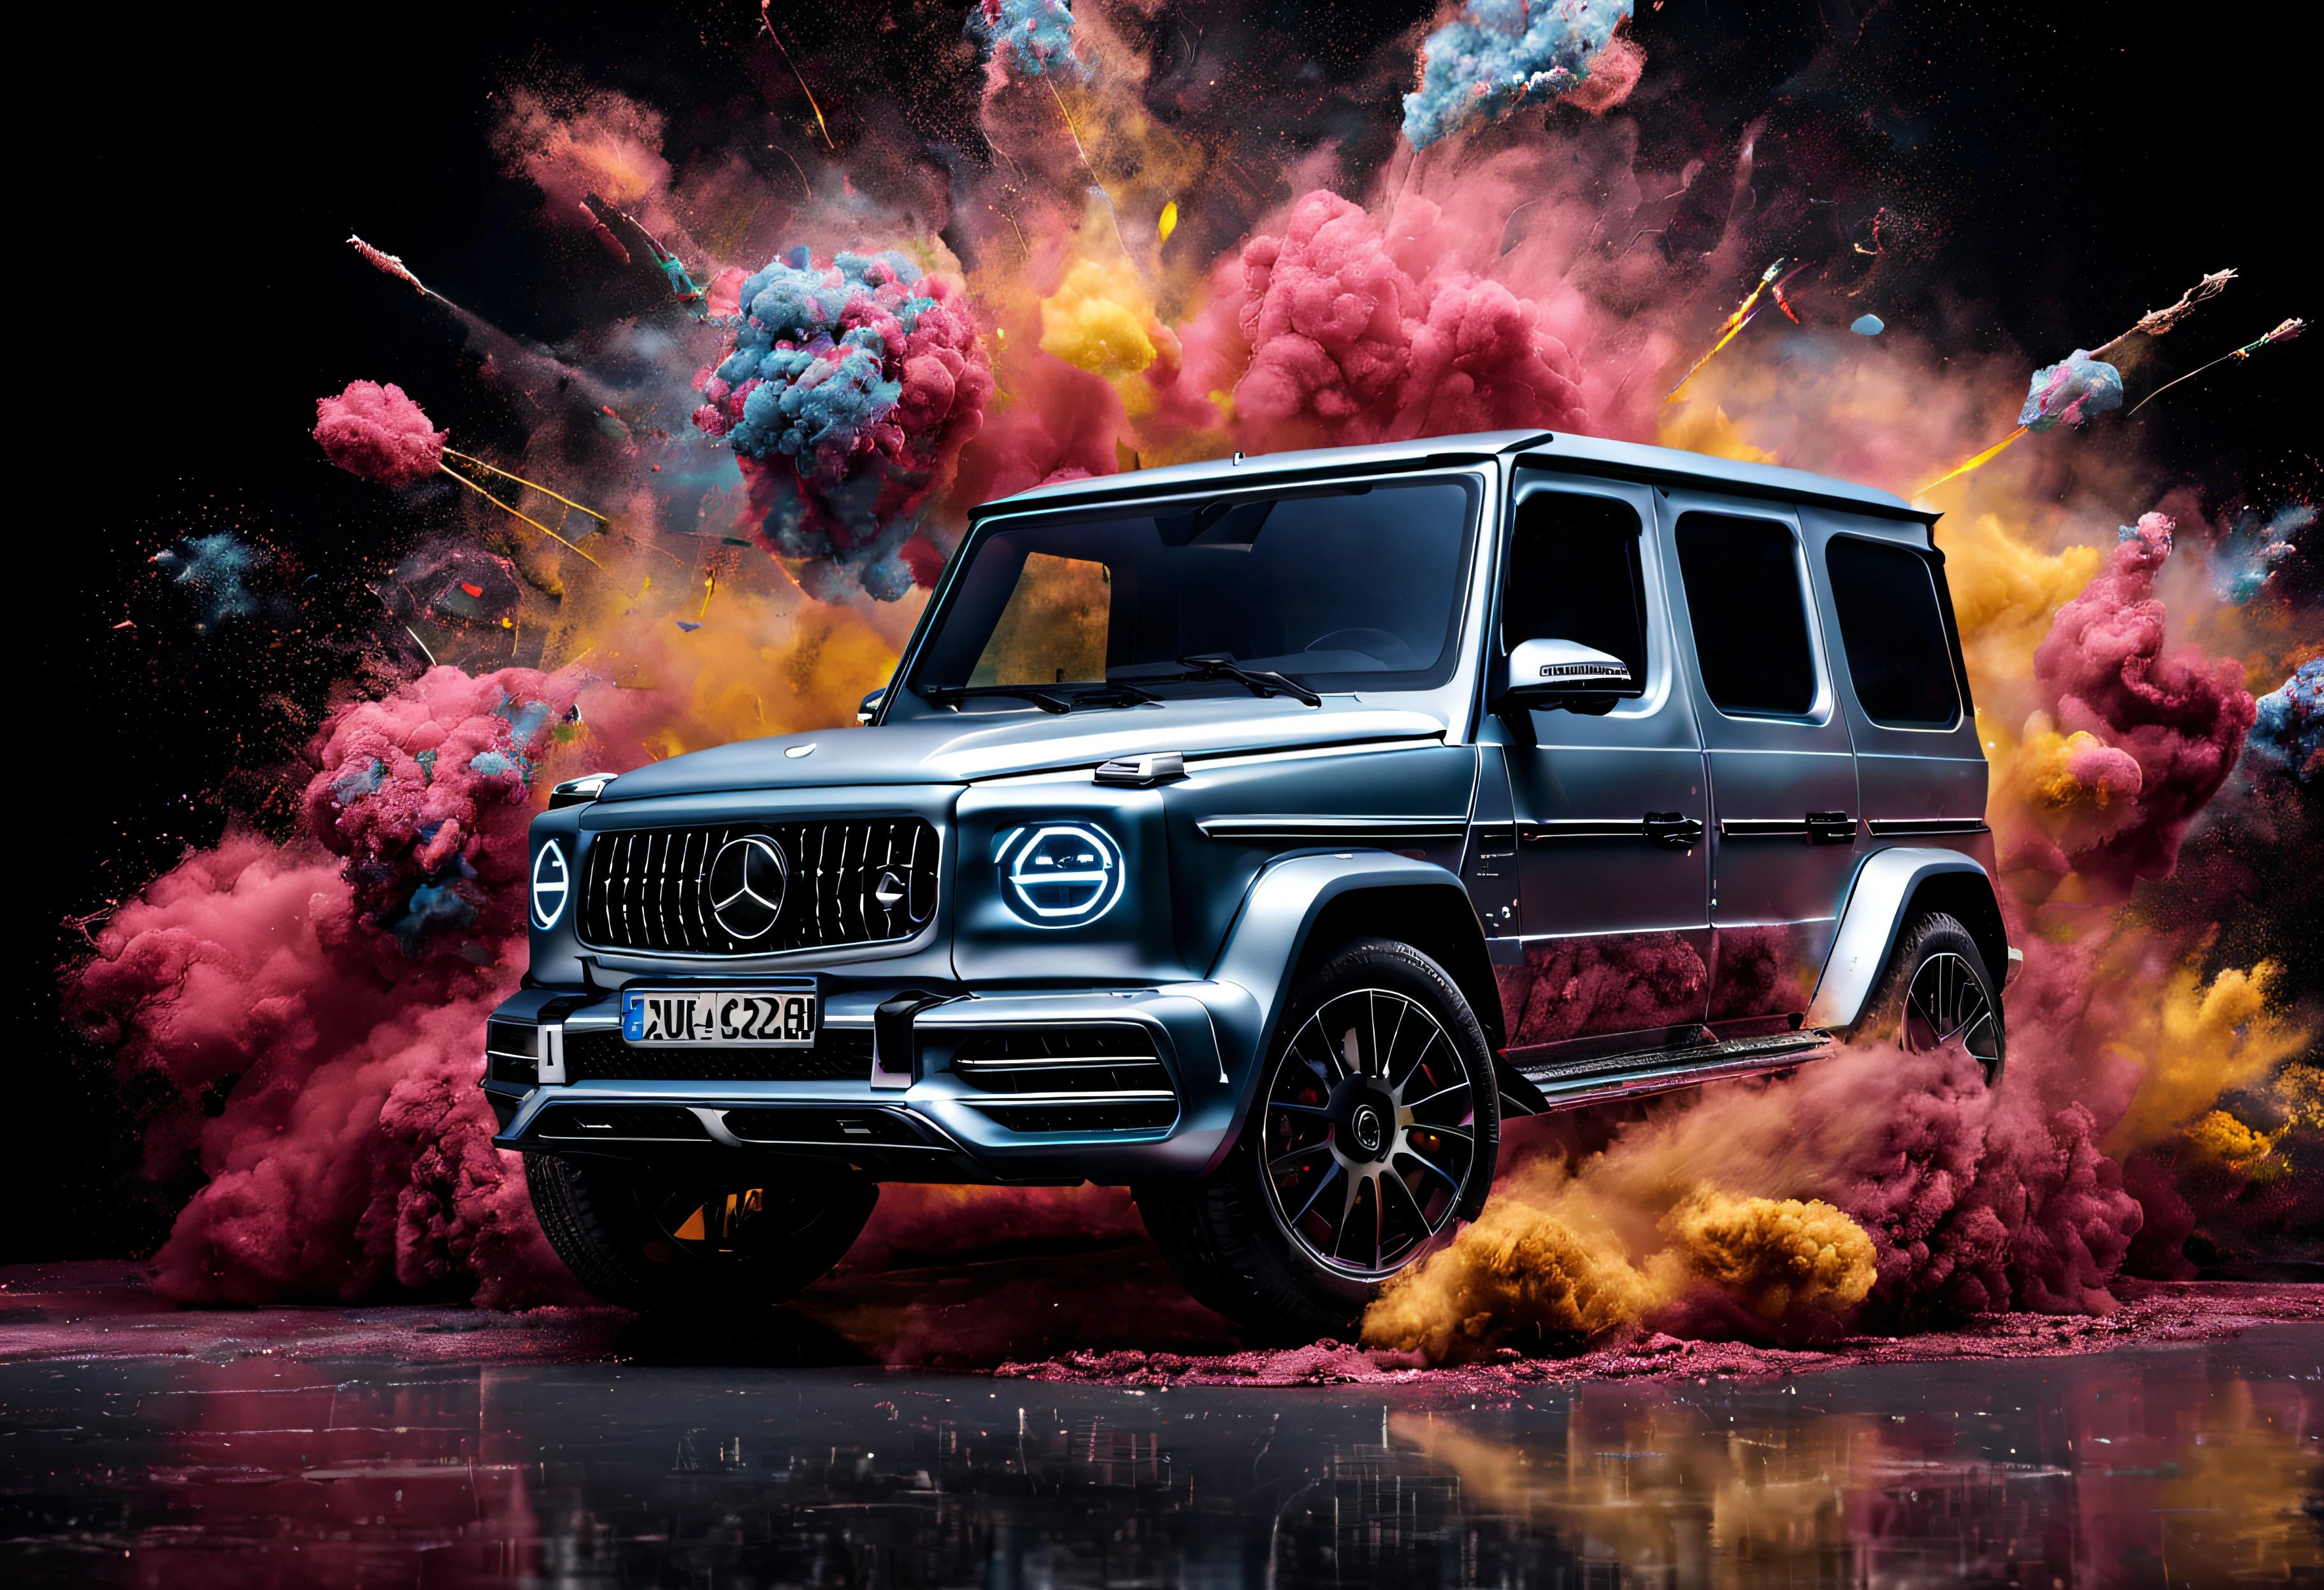 2020 Mercedes Class G, Studio background, Paint exploding in the background